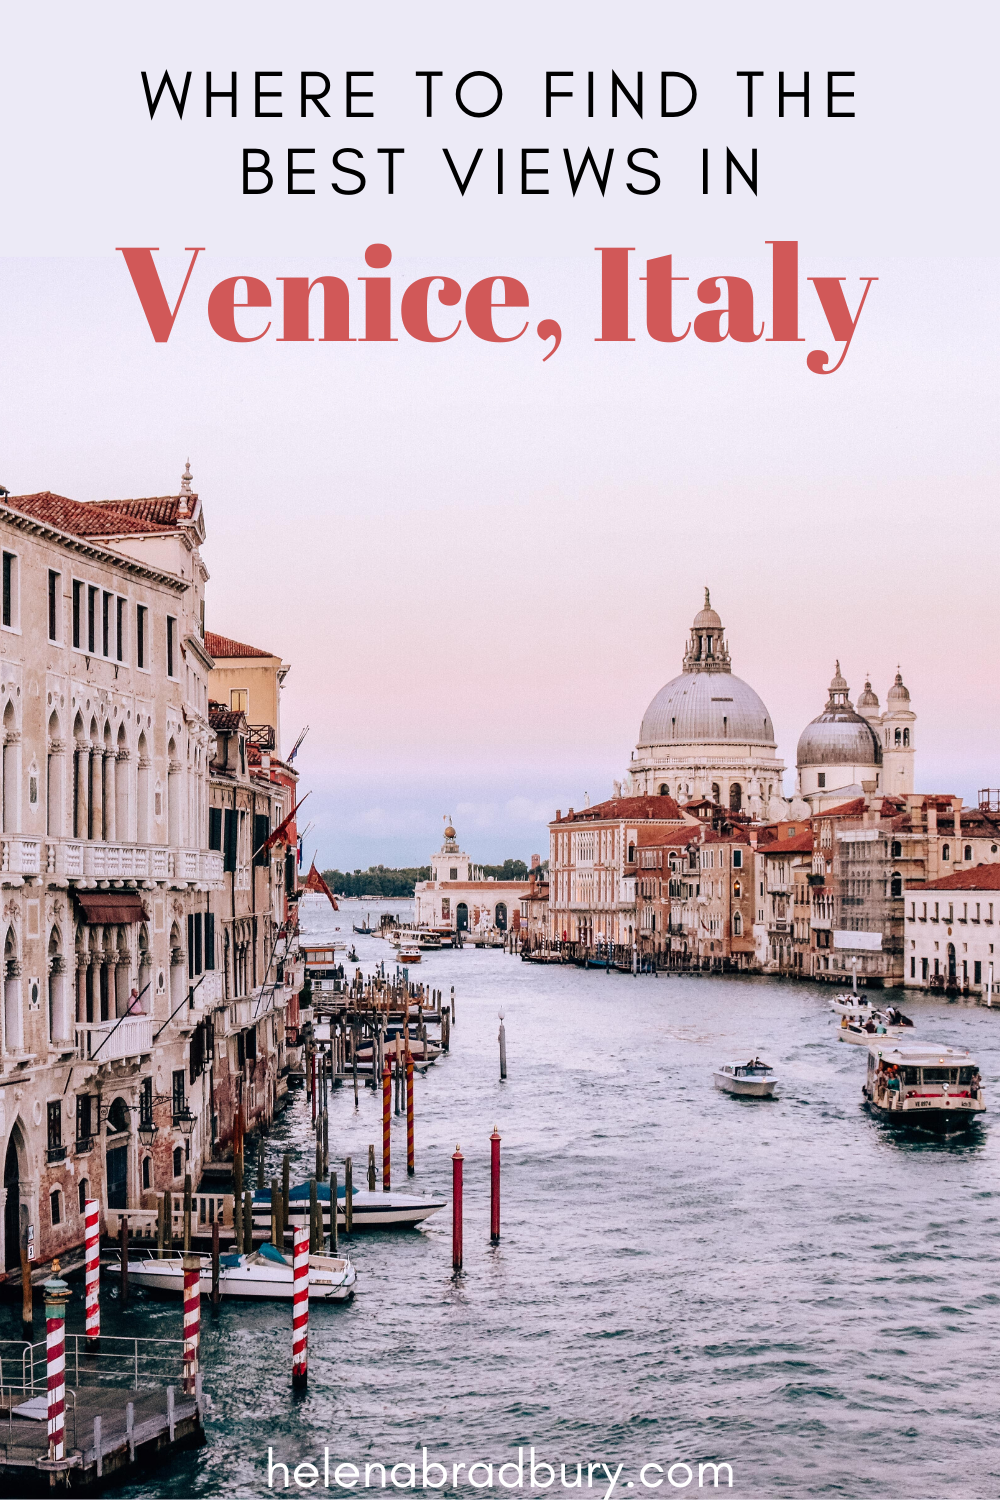 This guide of Where to find the best views in Venice will help you find the best places for panoramas, aerial views and iconic Venice photo locations for your trip to Venice